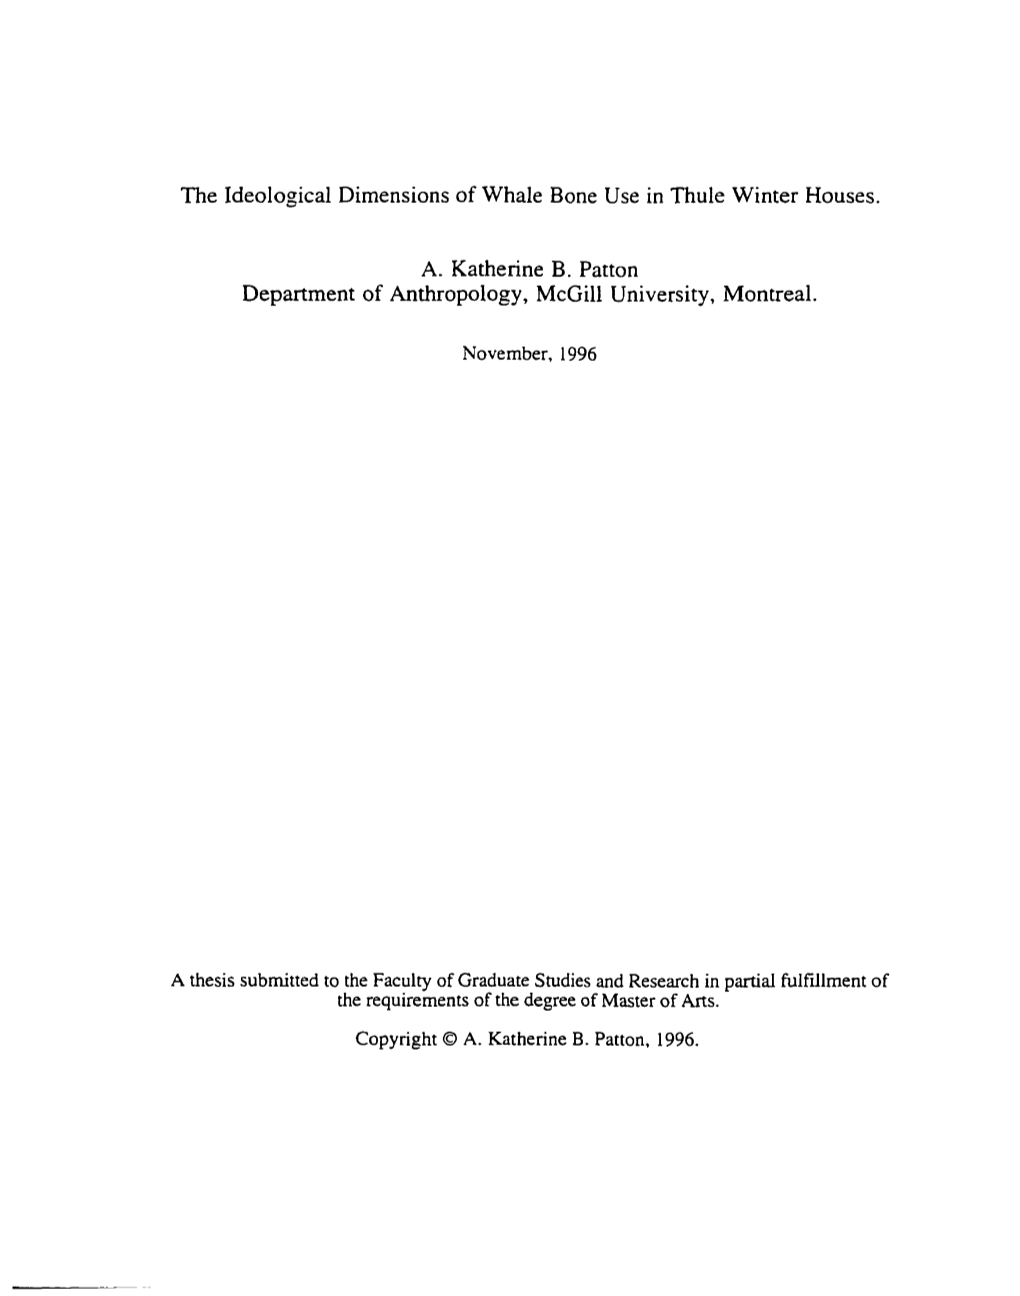 The Ideological Dimensions of Whale Bone Use in Thule Winter Houses